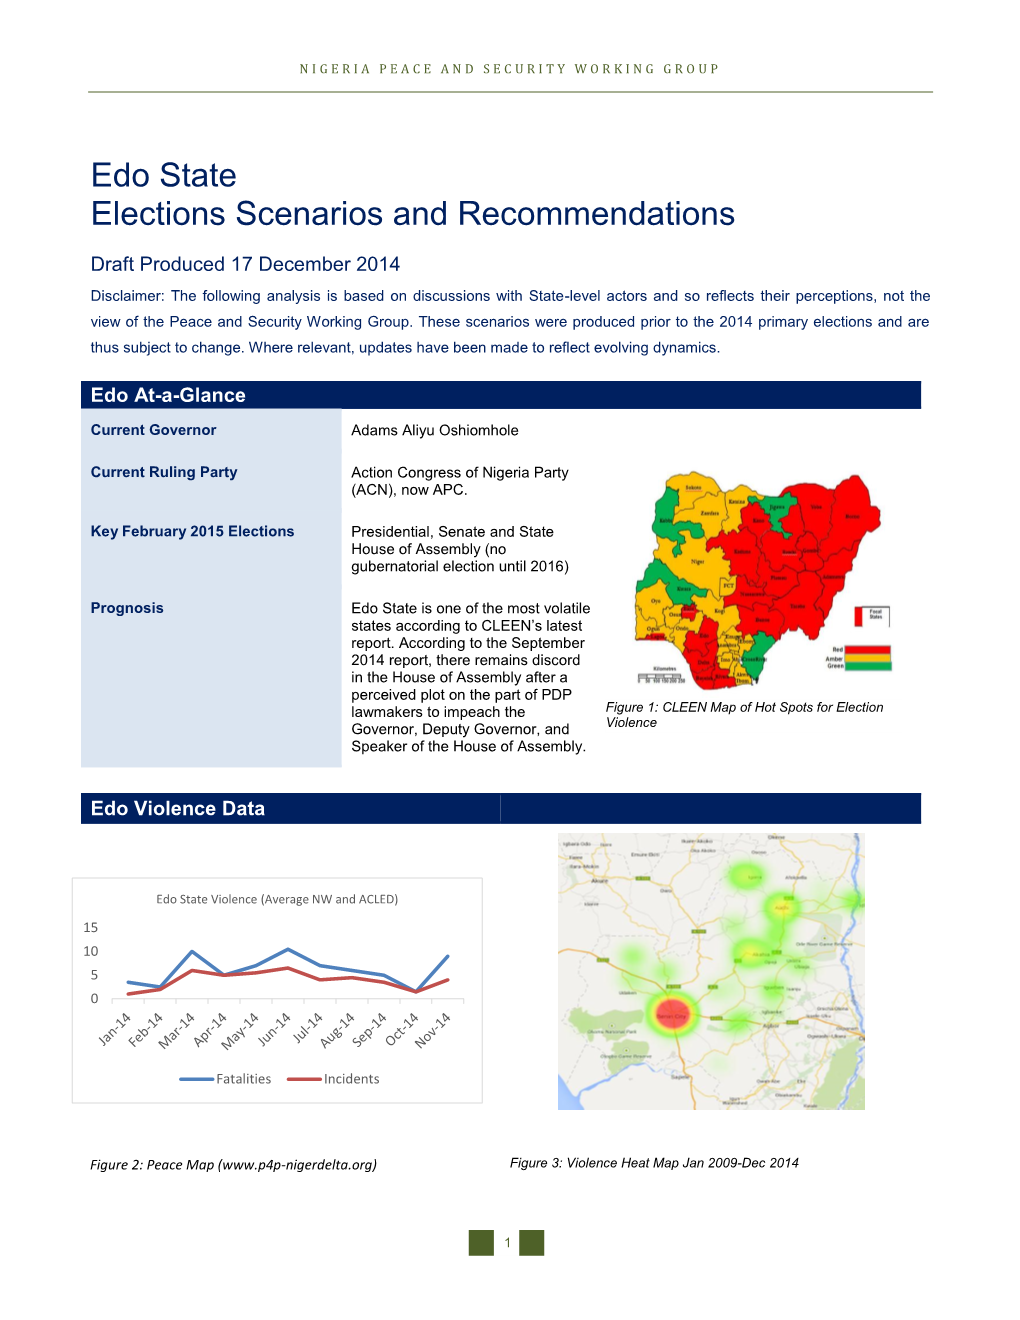 Edo State Elections Scenarios and Recommendations